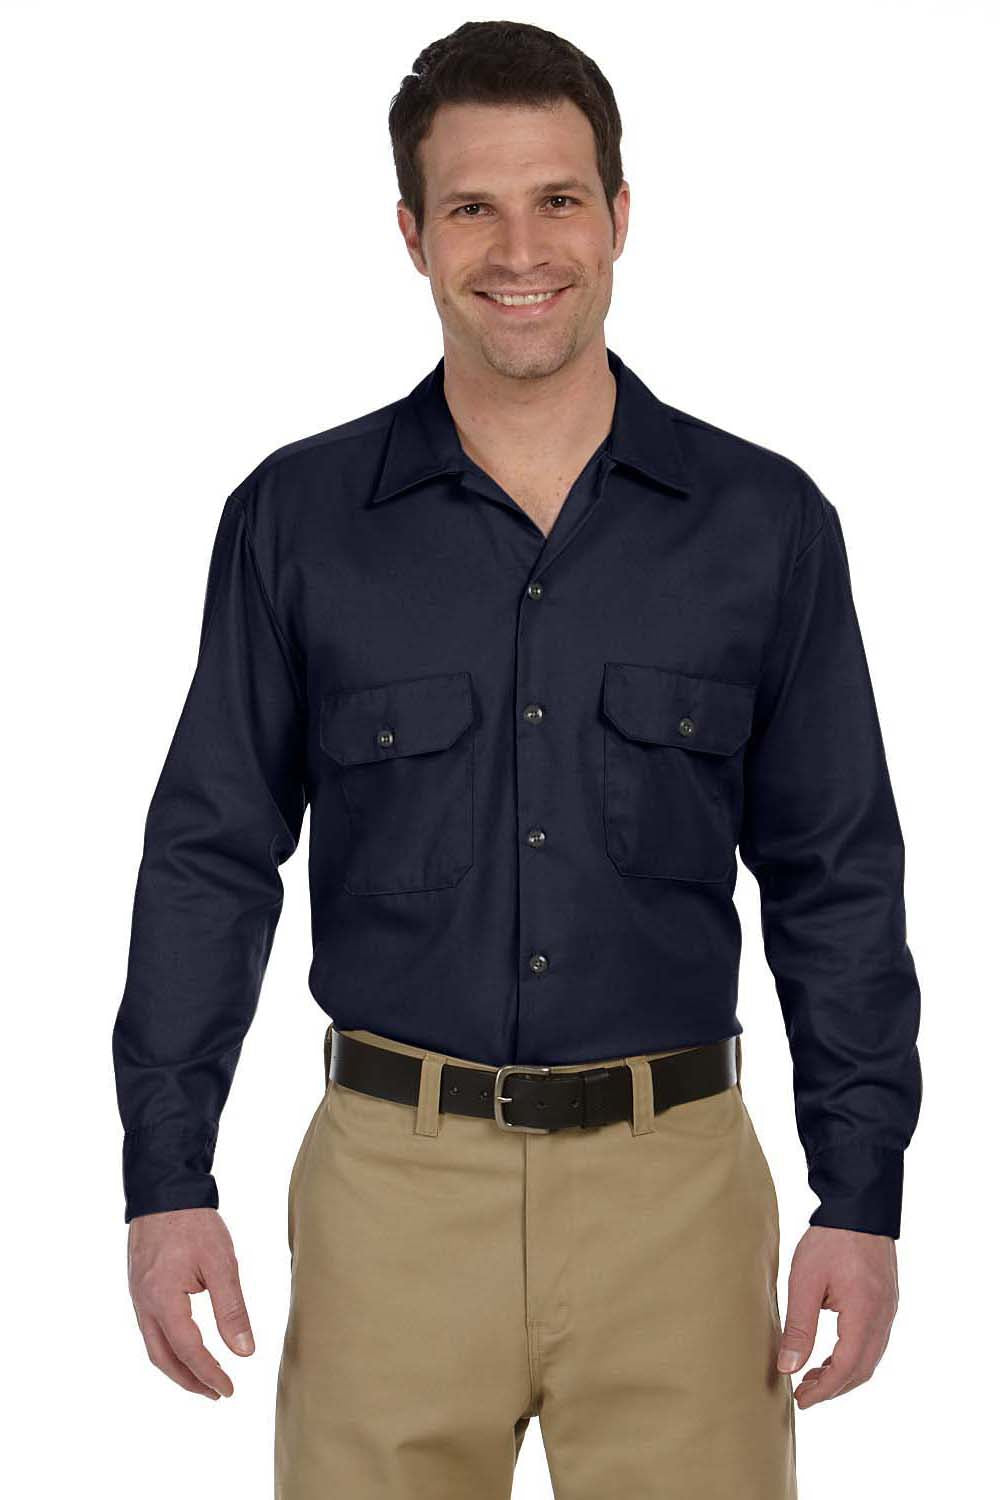 Dickies 574 Mens Moisture Wicking Long Sleeve Button Down Shirt w/ Double Pockets Navy Blue Front